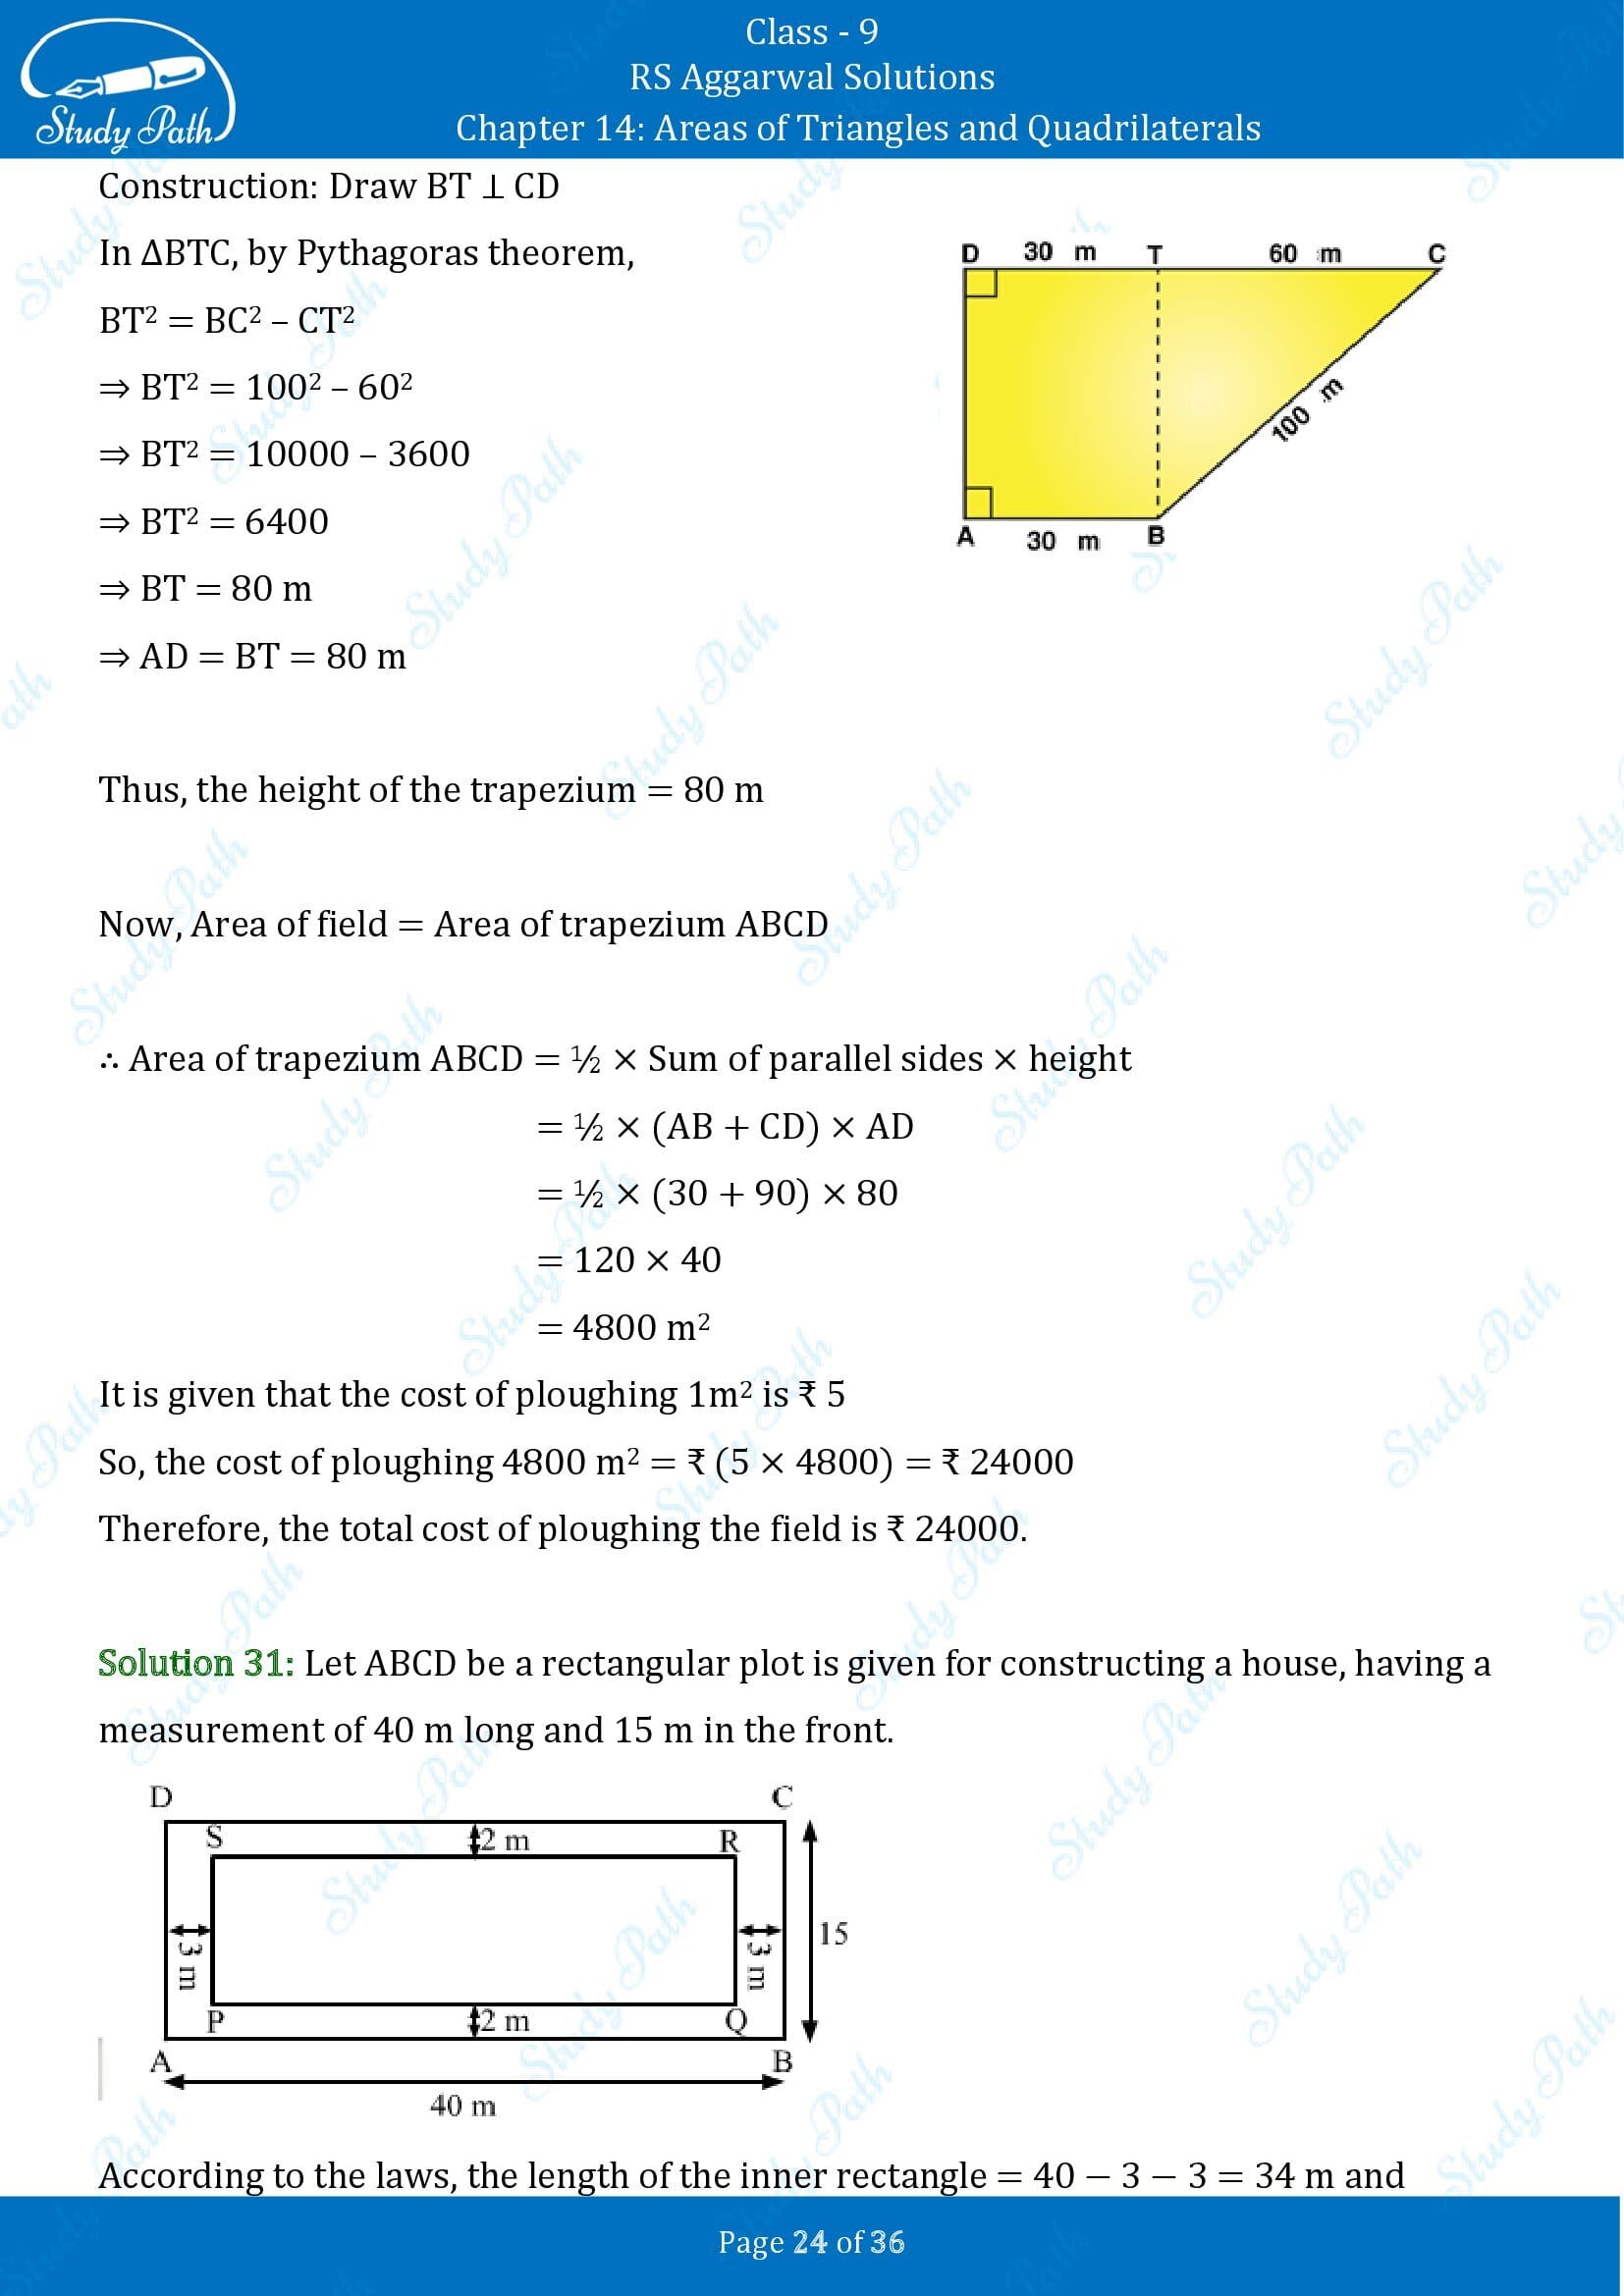 RS Aggarwal Solutions Class 9 Chapter 14 Areas of Triangles and Quadrilaterals Exercise 14 00024